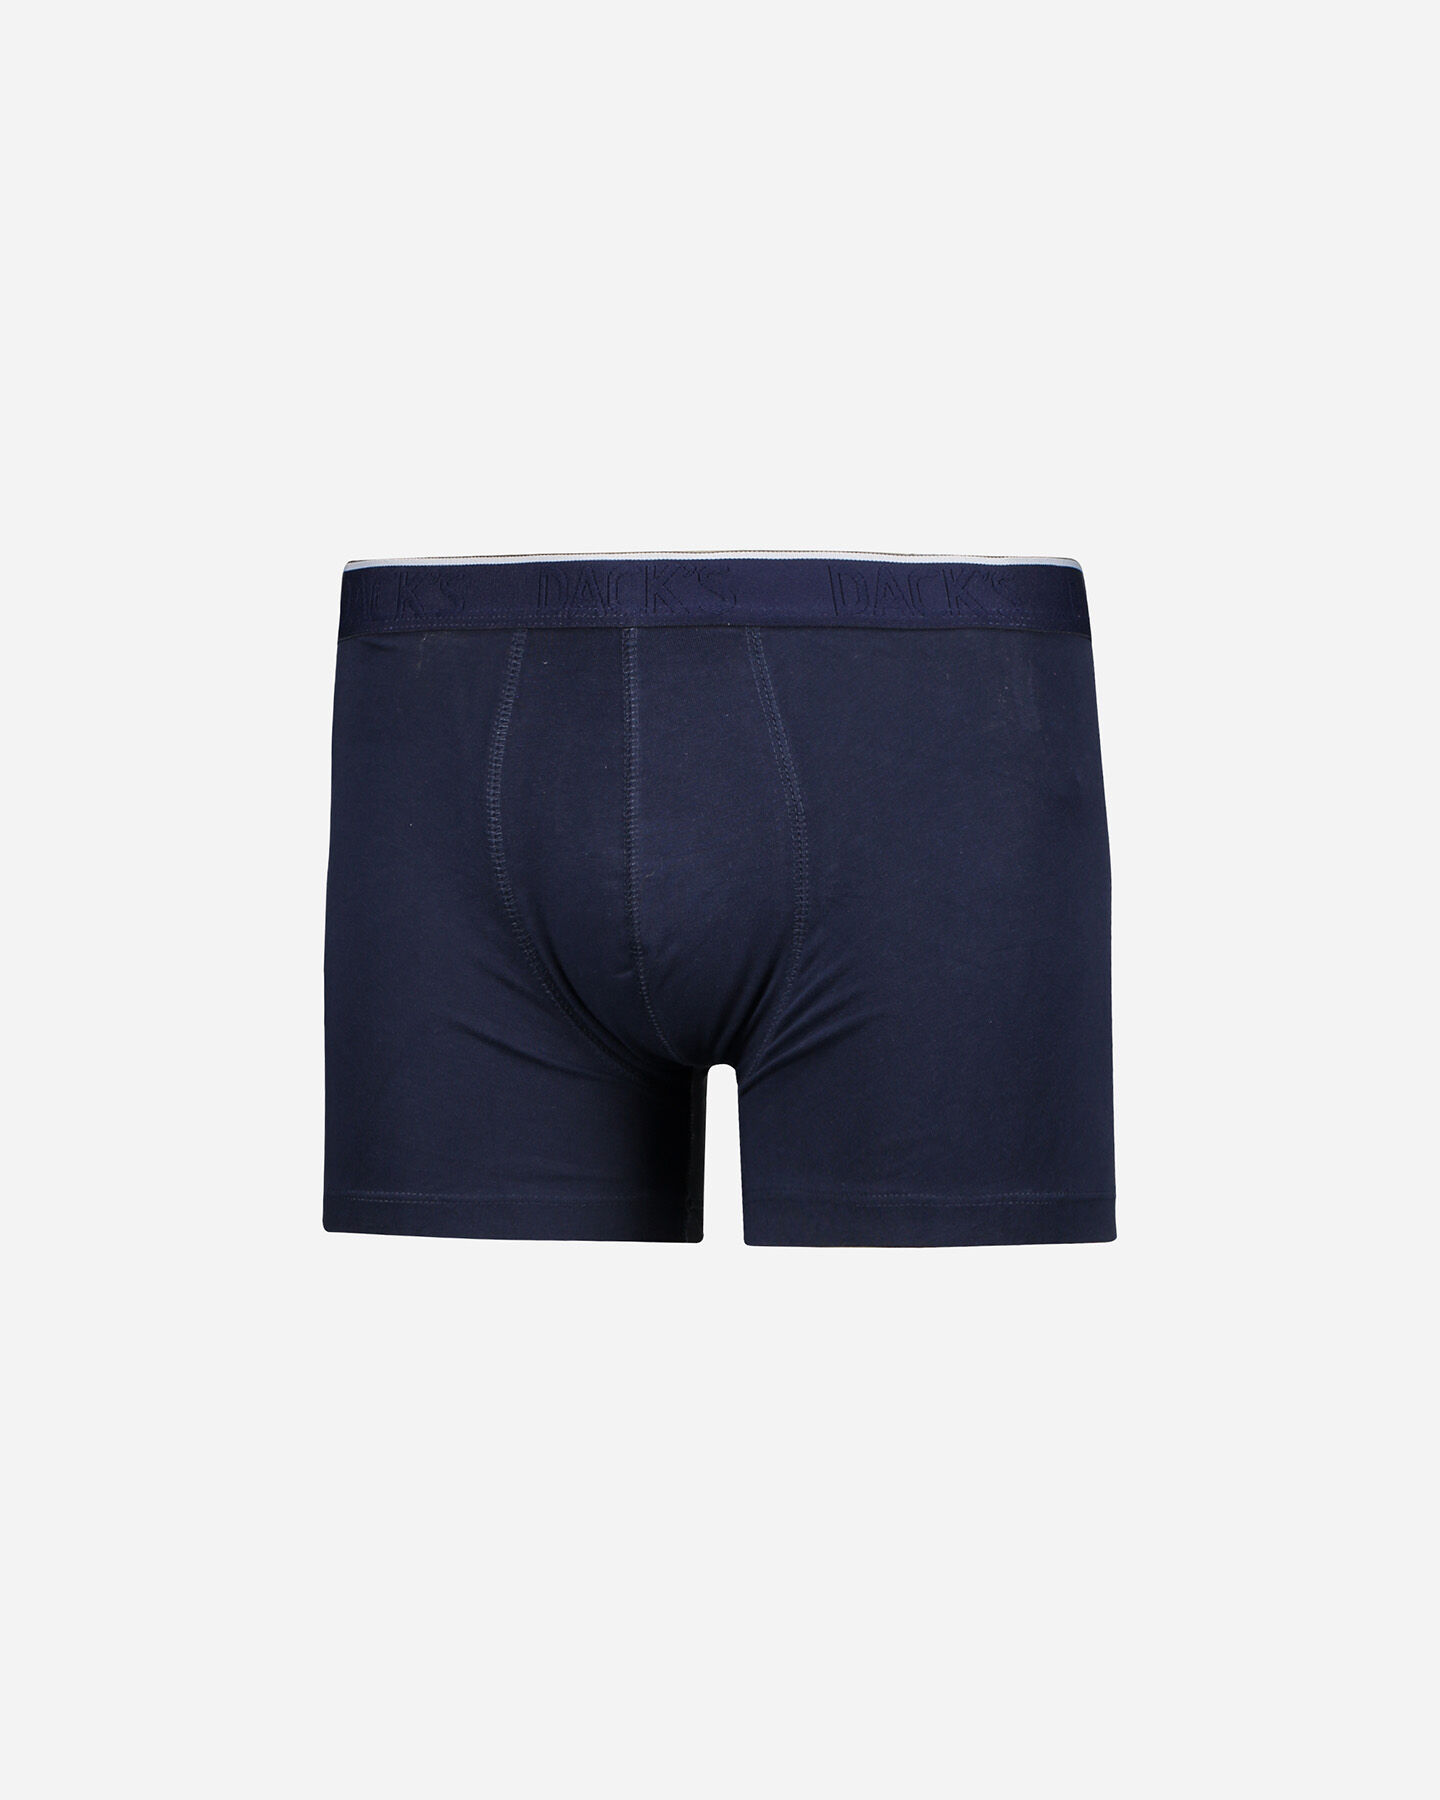  Intimo DACK'S BIPACK BASIC BOXER M S4061964|519/001|S scatto 2